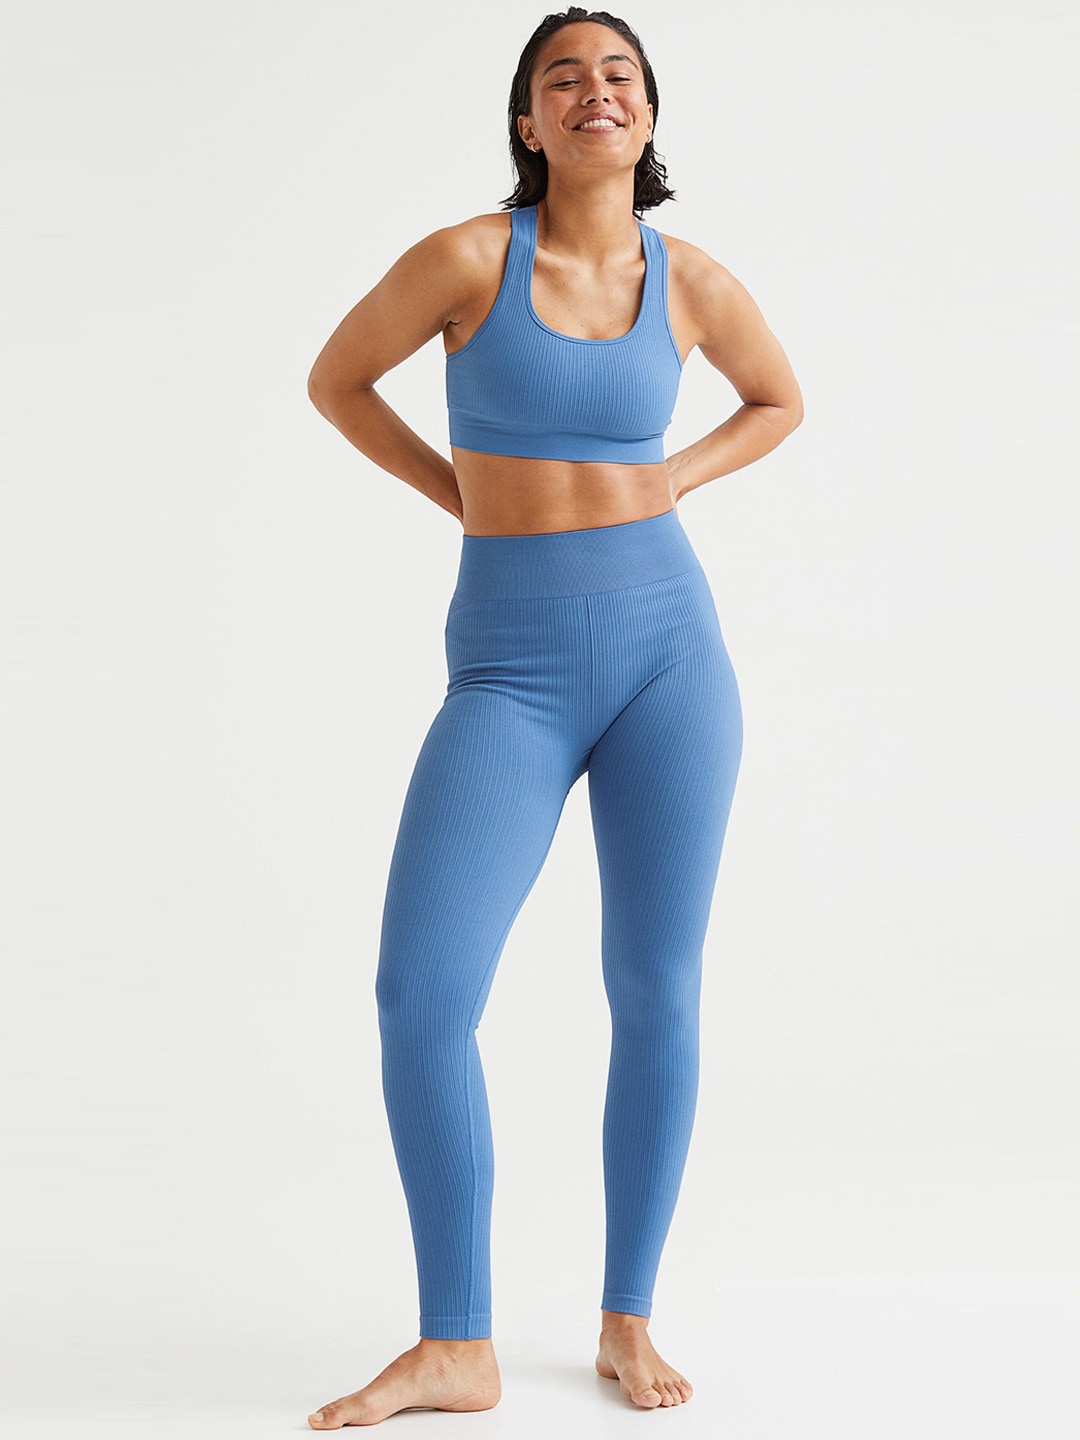 H&M Women Fast-Drying Seamless Sports Tights Price in India